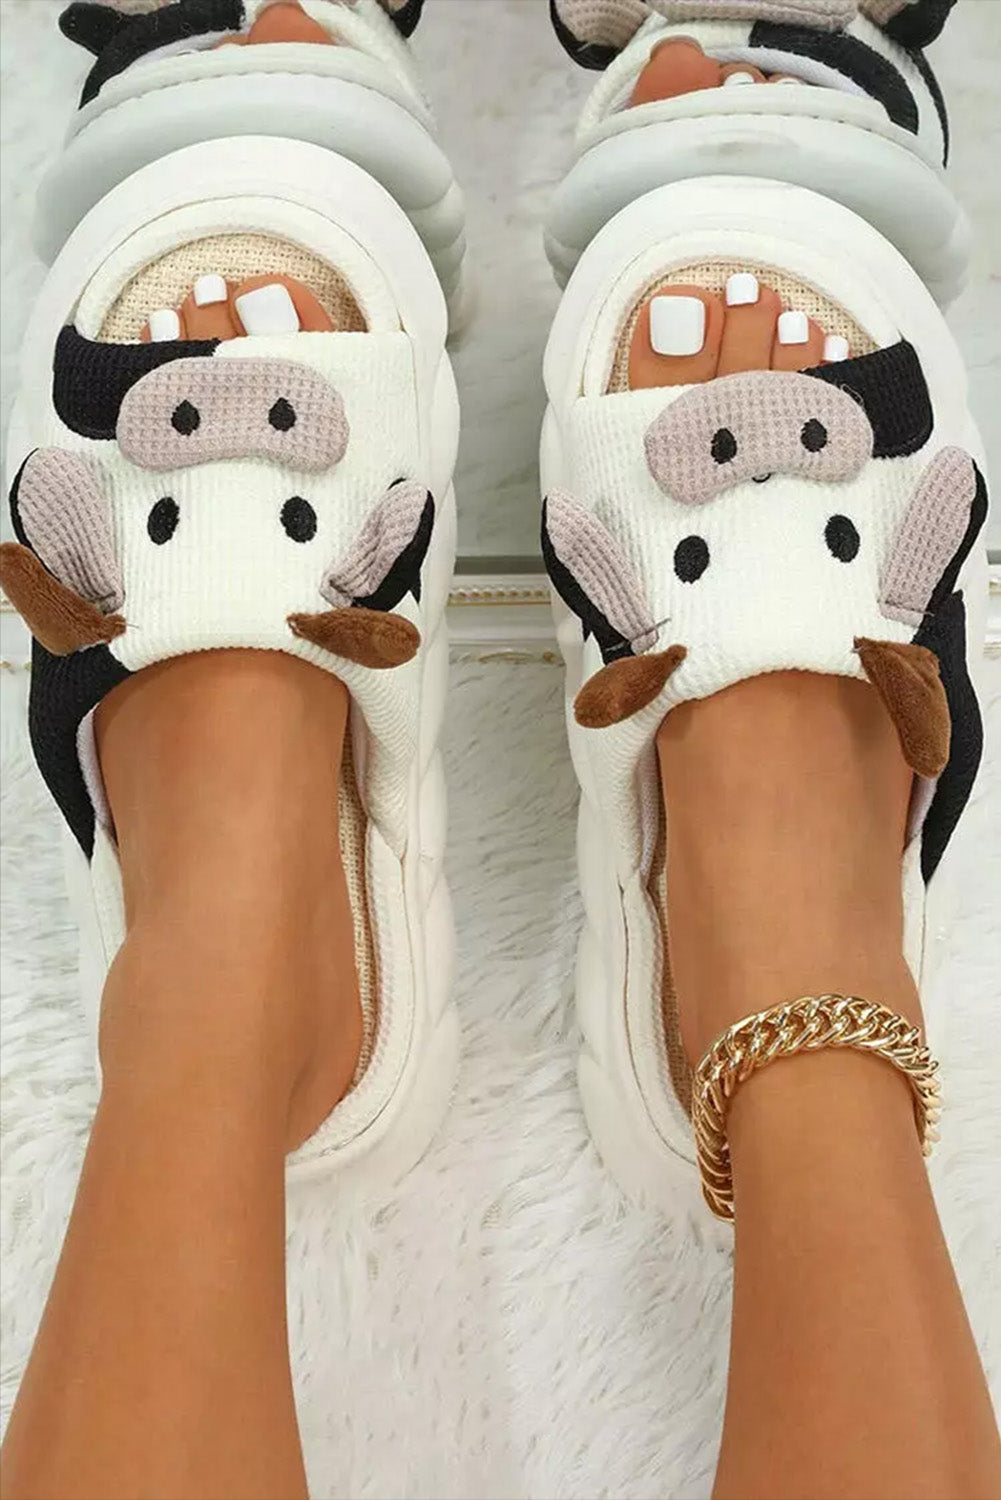 Bright White Cute Cow Pattern Open Toe Slippers Slippers JT's Designer Fashion